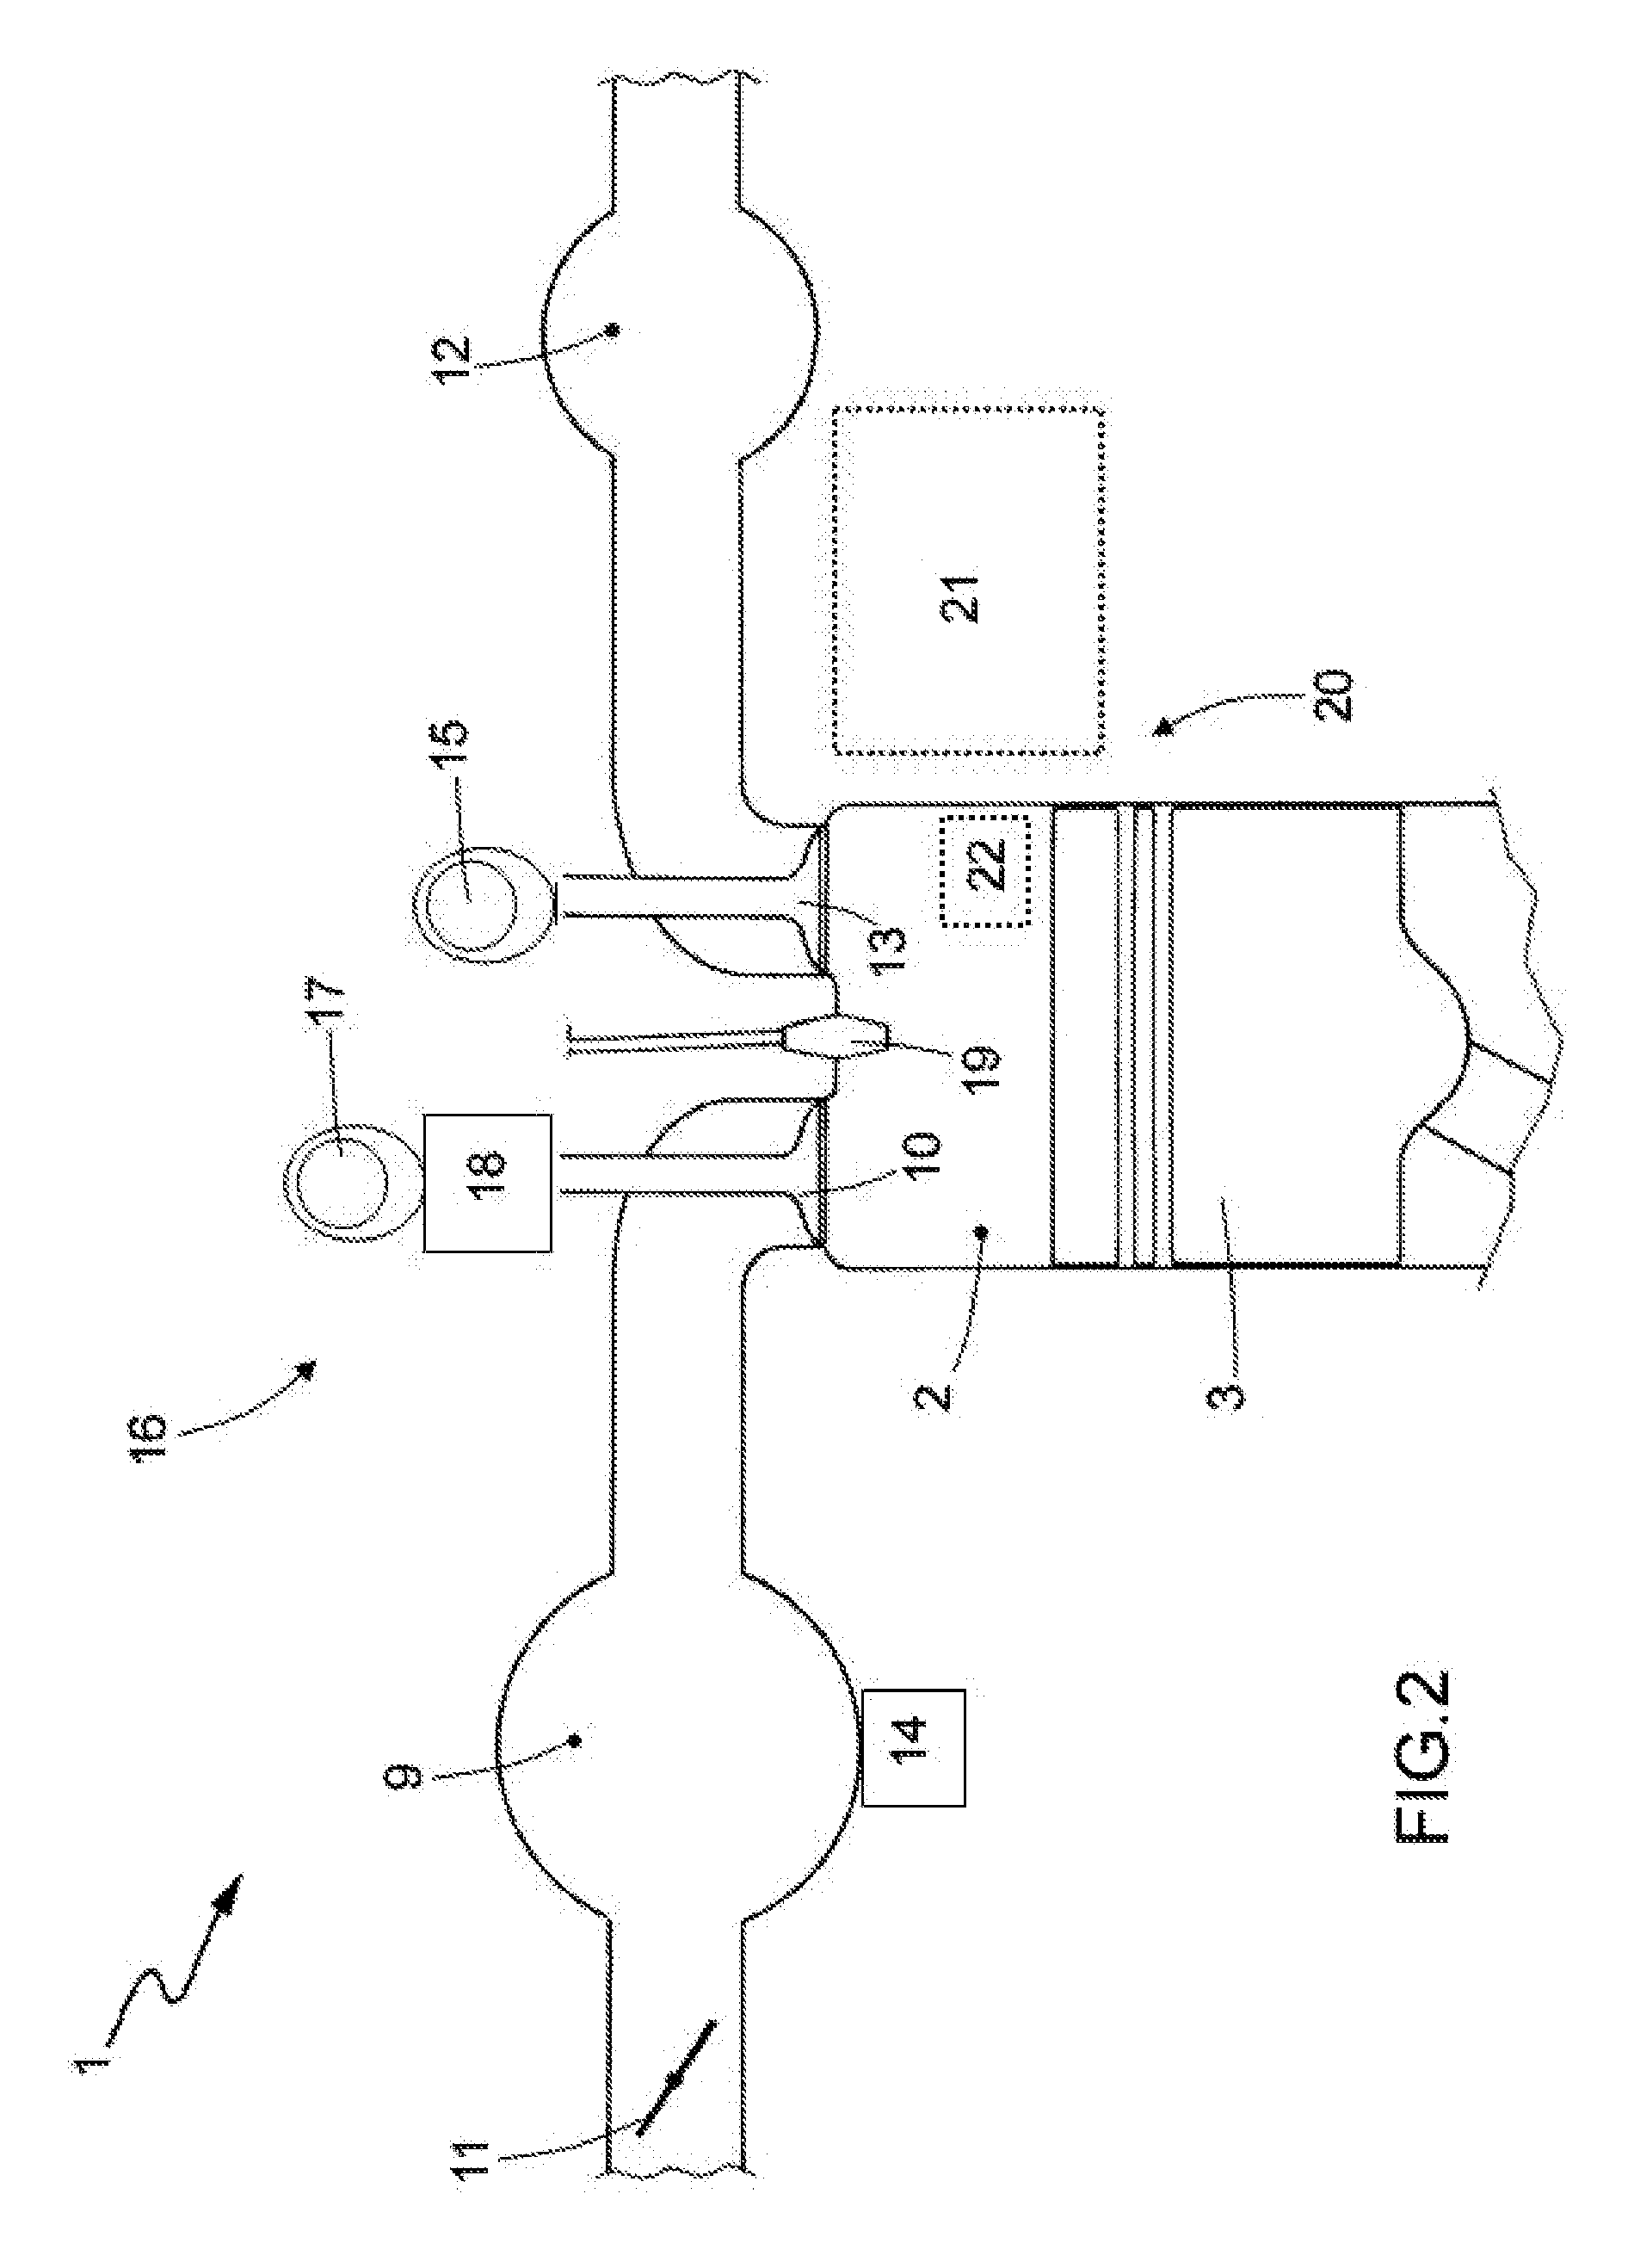 Method for controlling the movement of a component that moves towards a position defined by a limit stop in an internal combustion engine